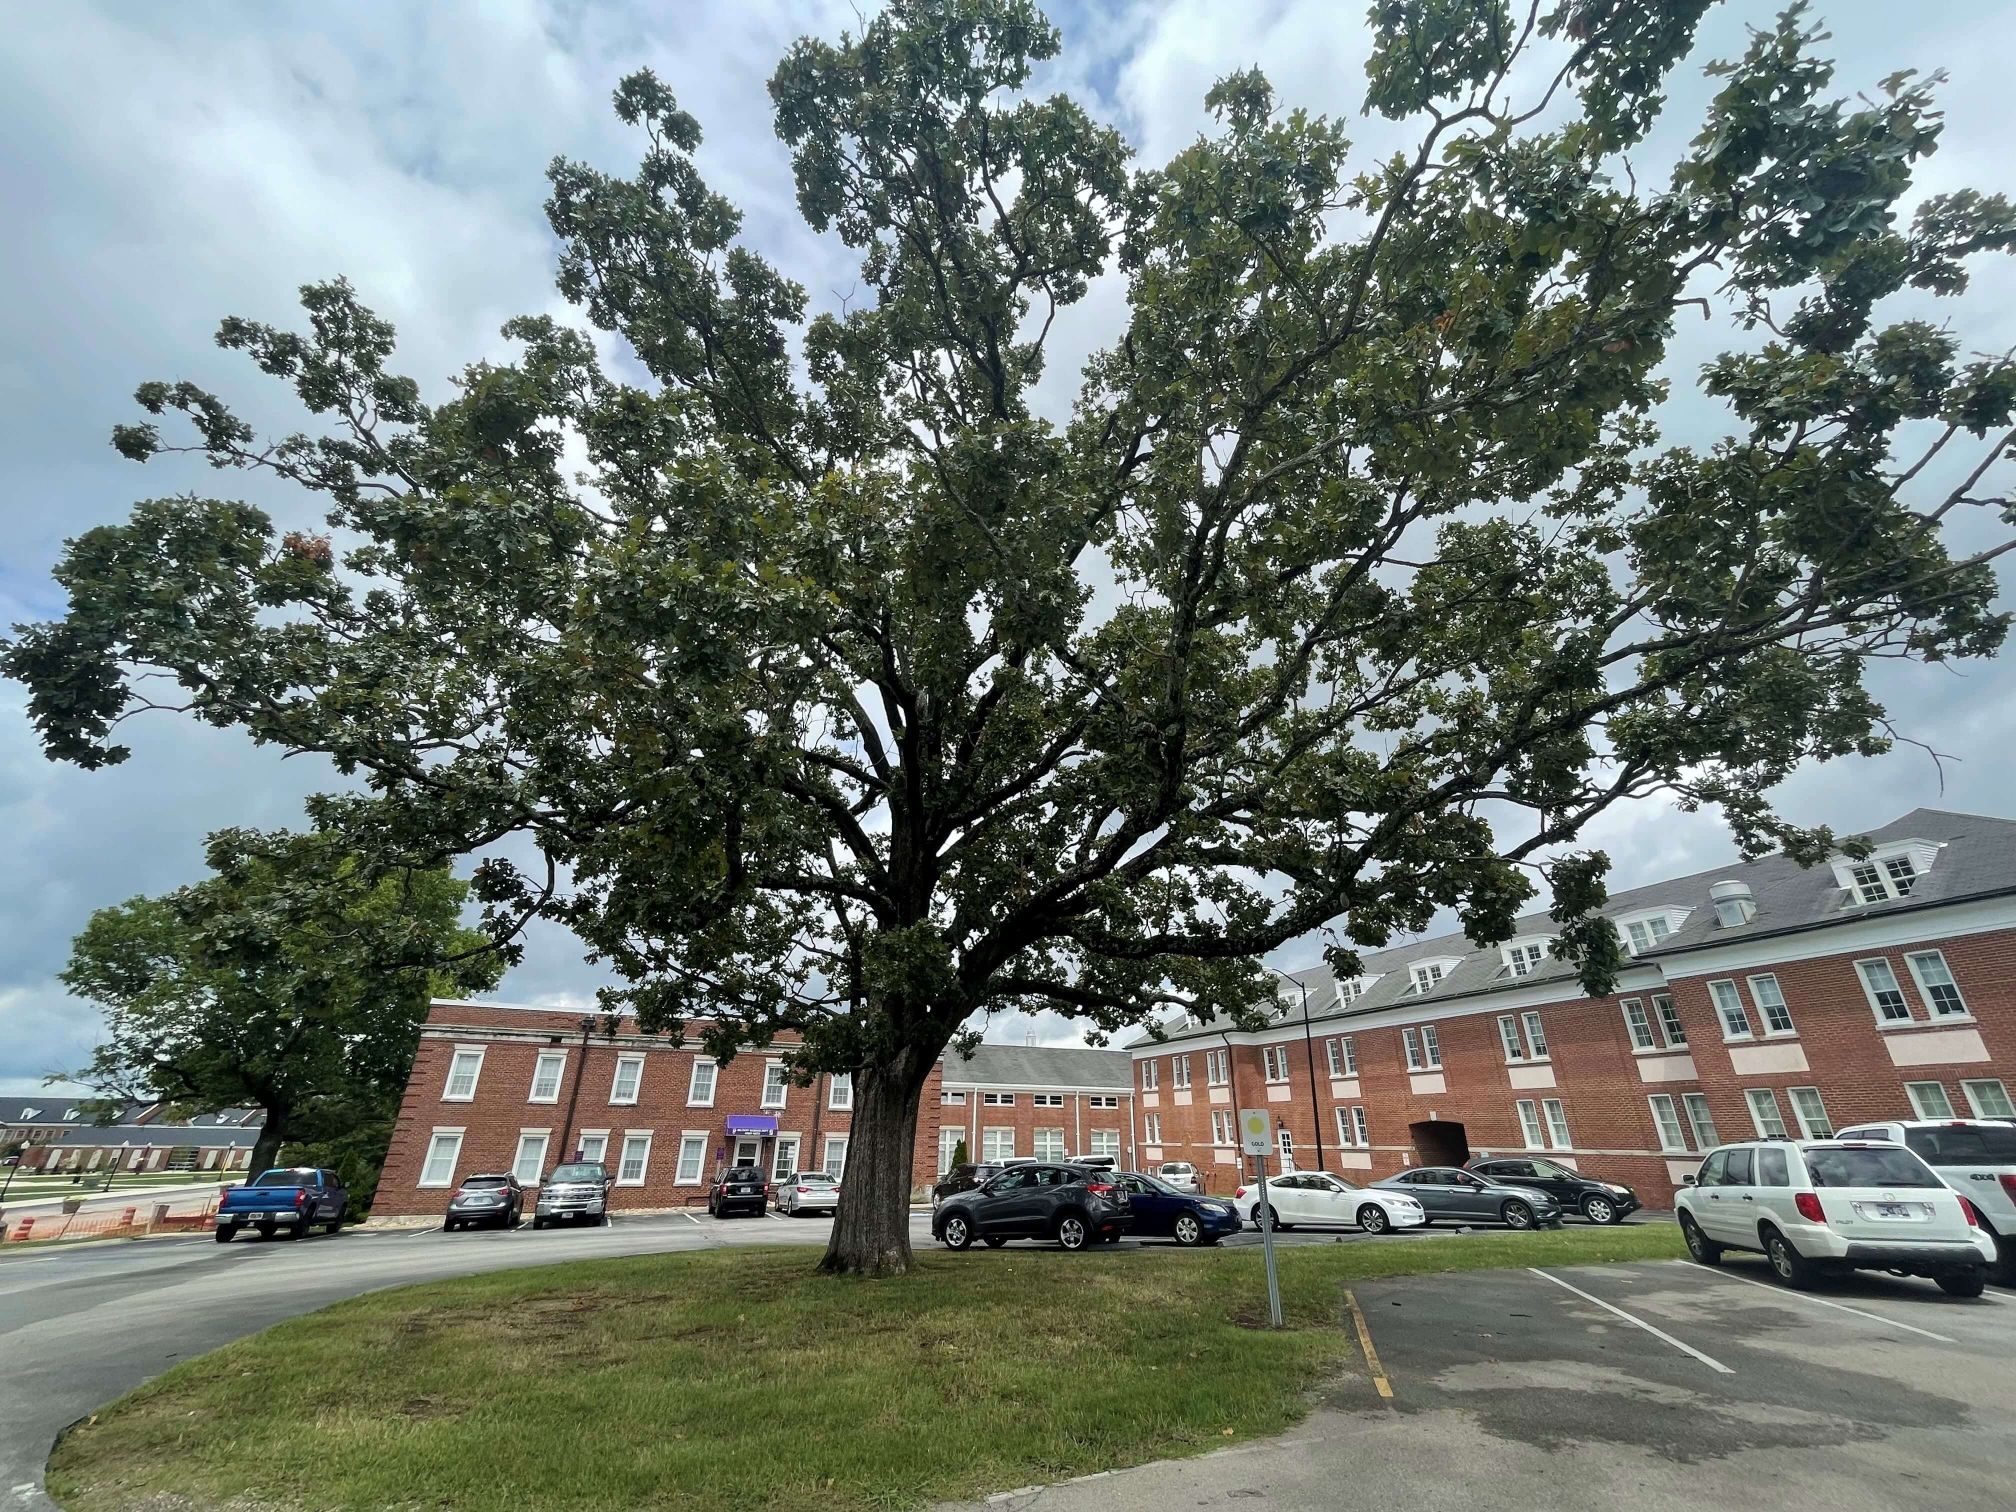 The post oak by the ROTC building